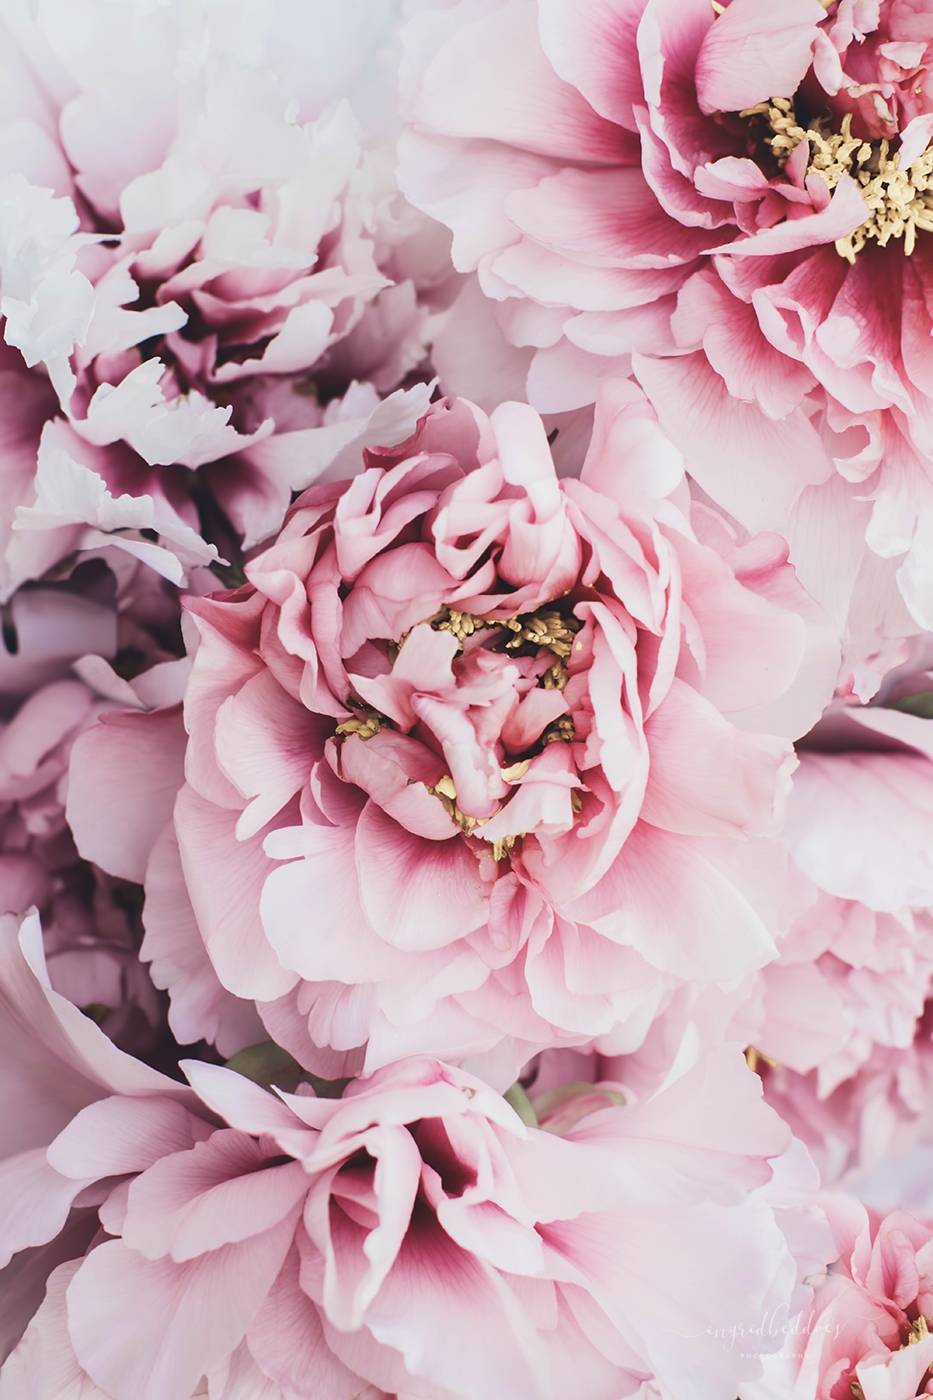 Flower Photography: Pink Blush Peonies. Ingrid Beddoes Photography